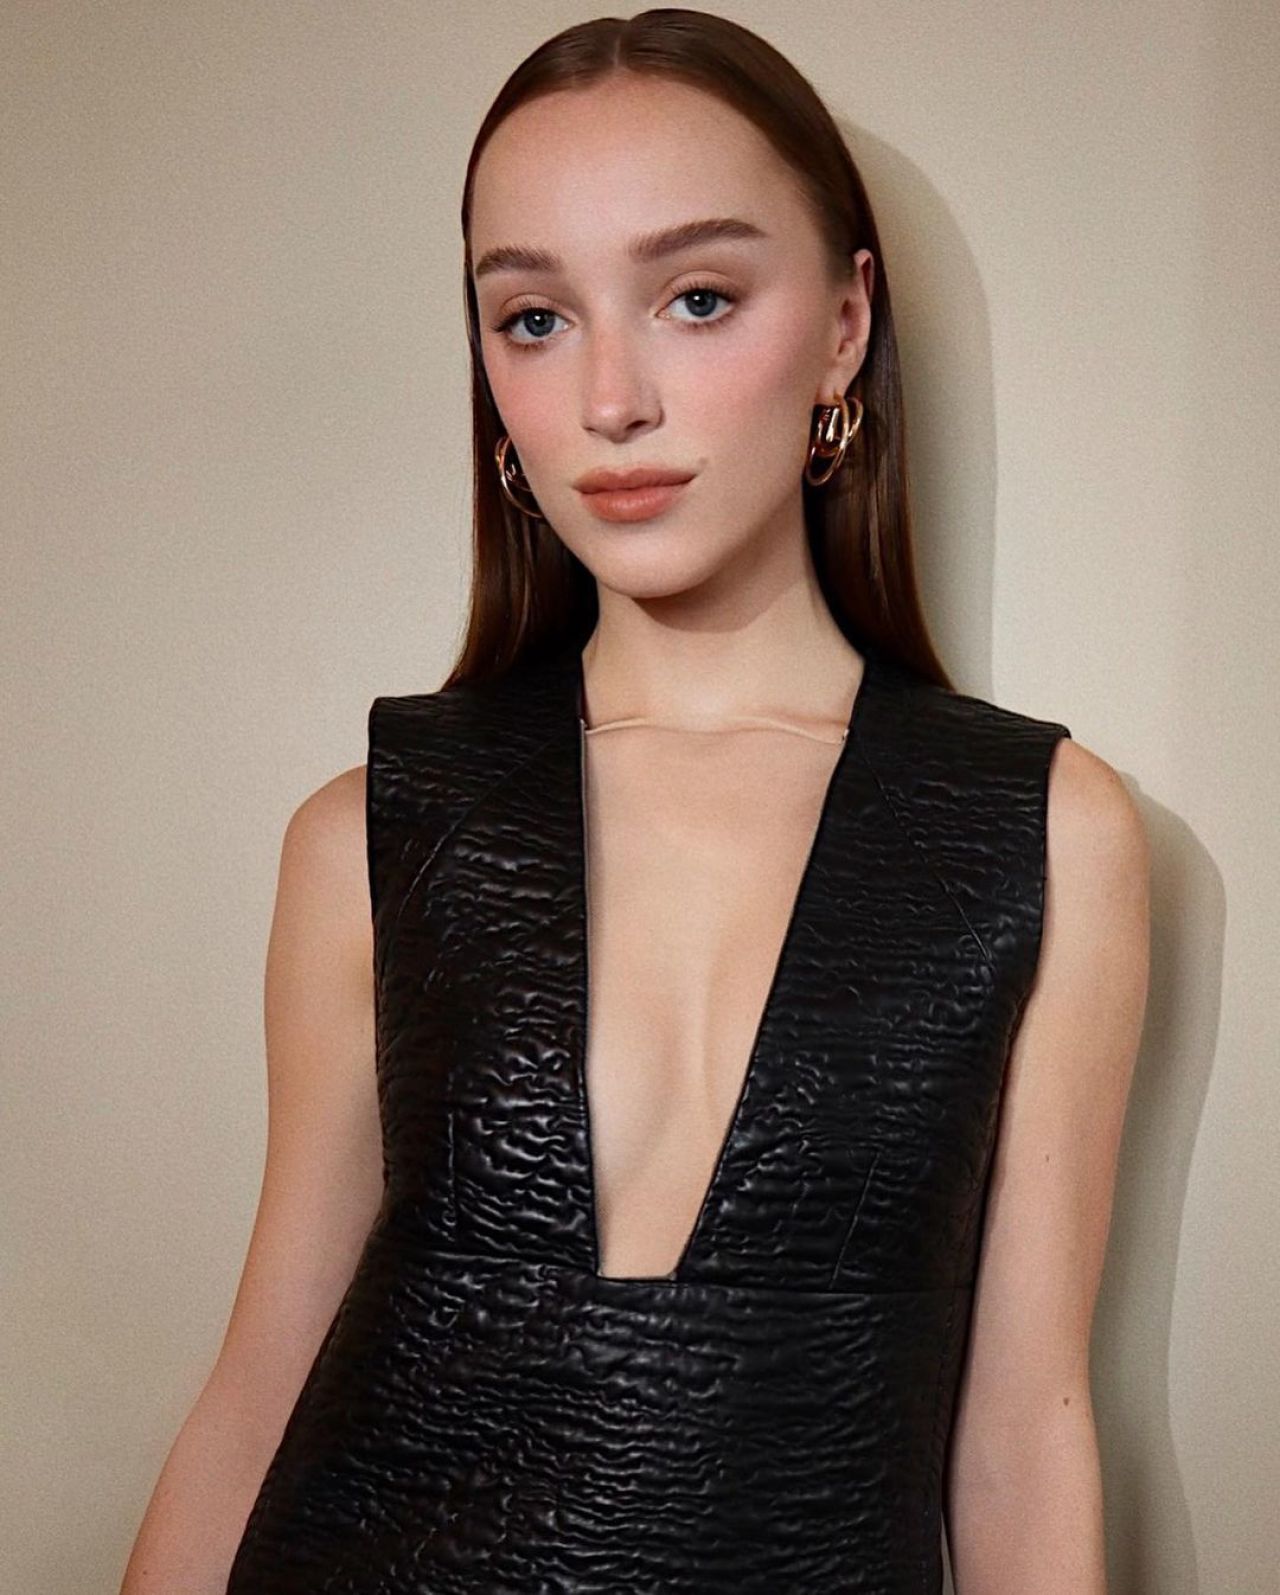 Phoebe Dynevor Louis Vuitton Fashion Show October 5, 2021 – Star Style